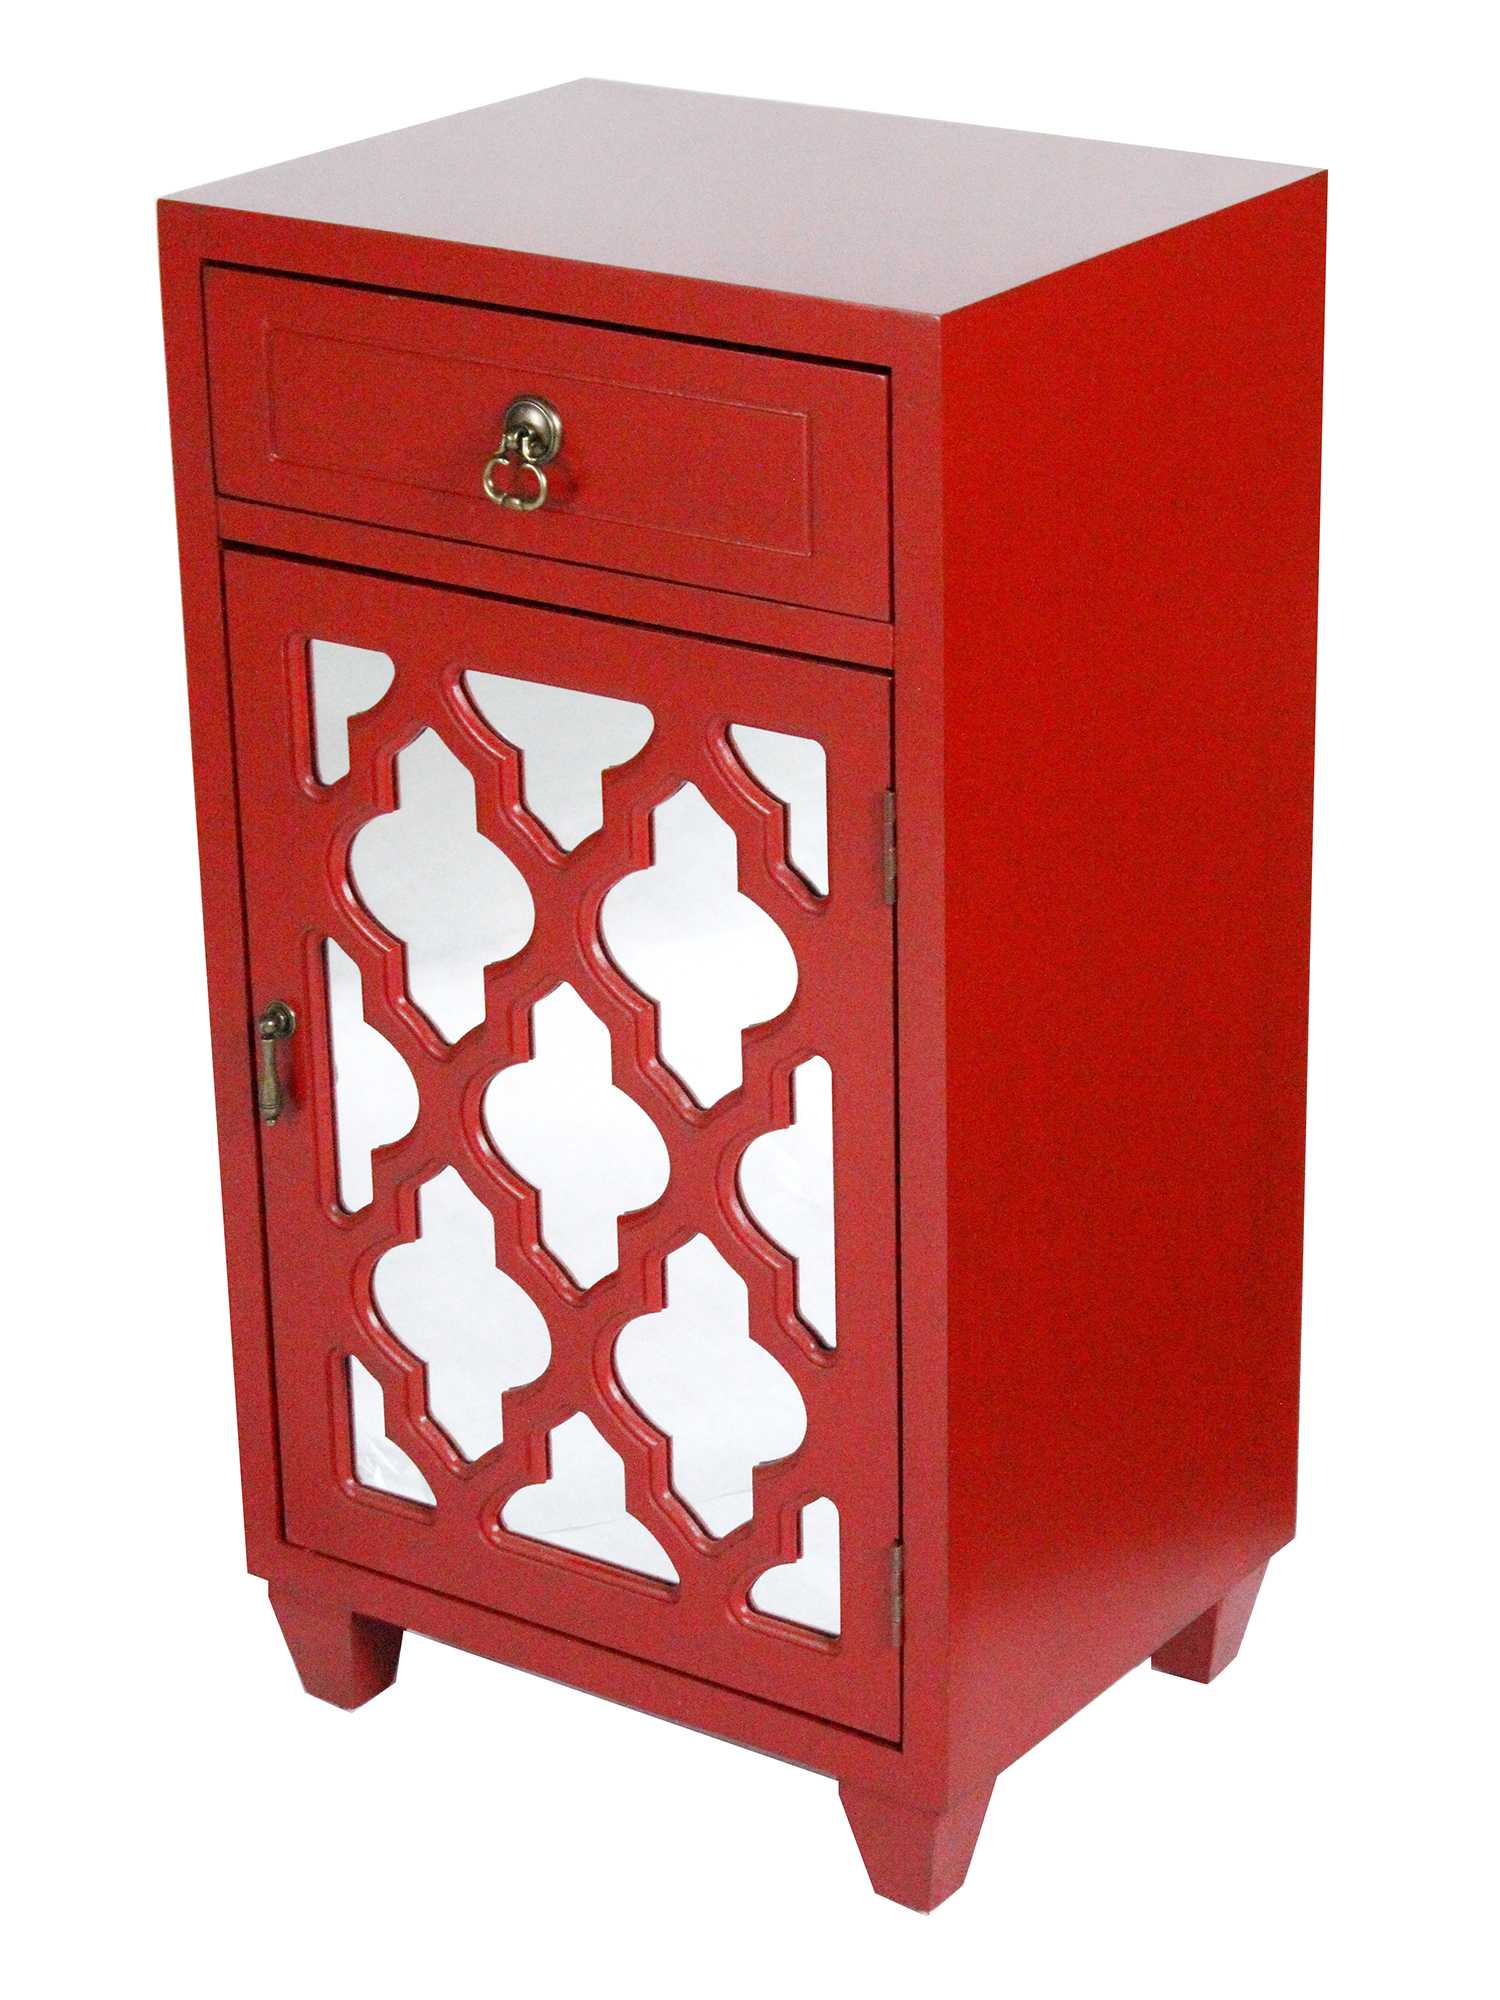 16.75" X 12.75" X 30.75" Red MDF Wood Mirrored Glass Accent Cabinet with a Drawer and Door and Arabesque Inserts